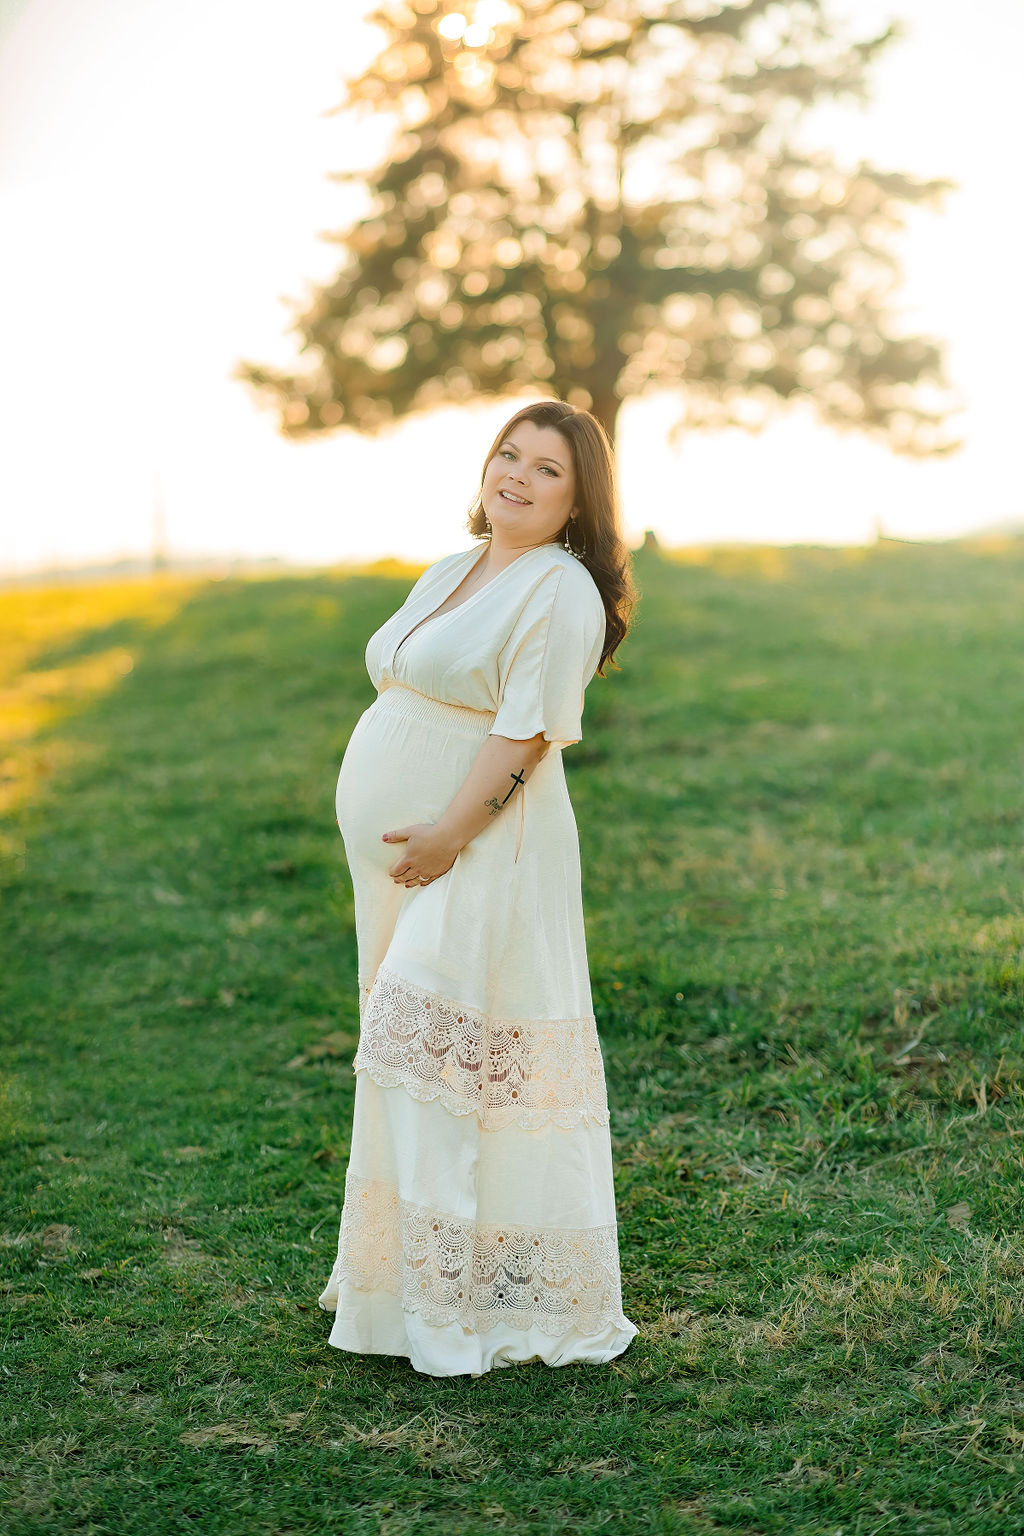 A mother to be stands in a grassy field holding her bump in a white dress